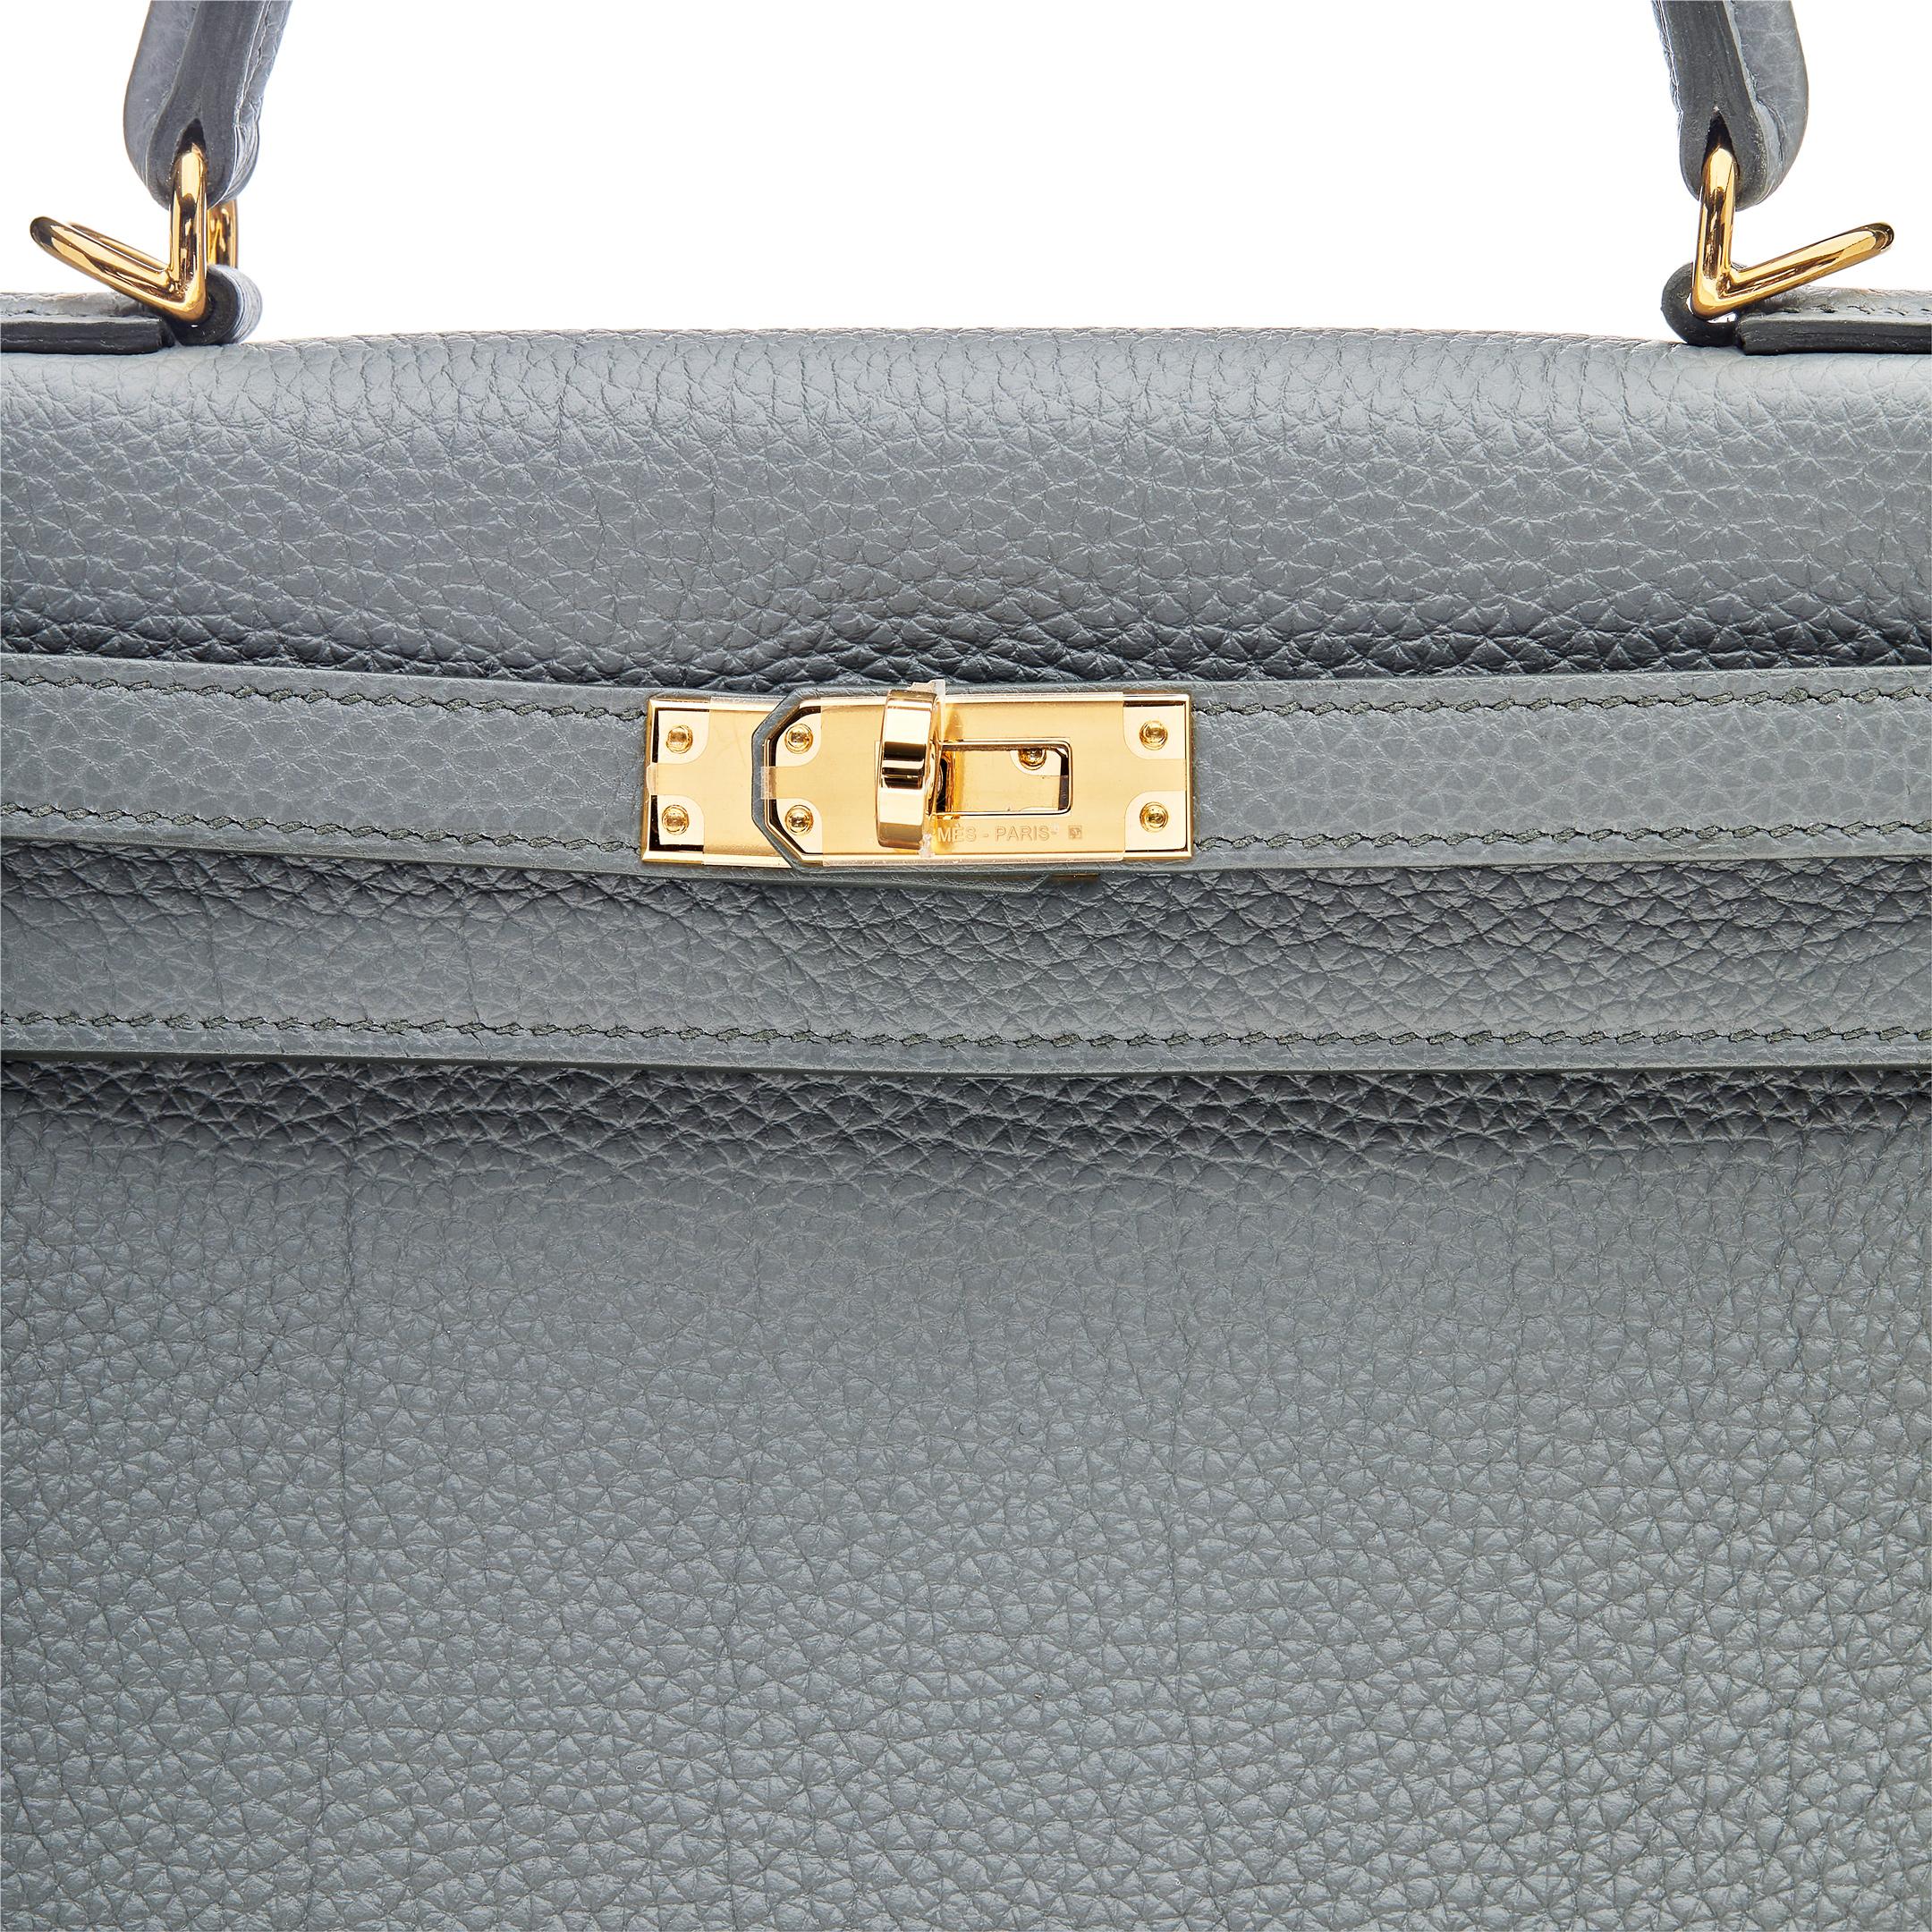 Hermes Kelly Retourne 25 Veau Togo 63 Vert Amande, Gold Hardware

Condition: Brand New 
Material: Togo Leather
Measurements:  (W)35cm x (H)25cm x (D)12cm
Hardware: Gold plated
 
Comes in full original packaging. 
Includes original Hermes raincover &